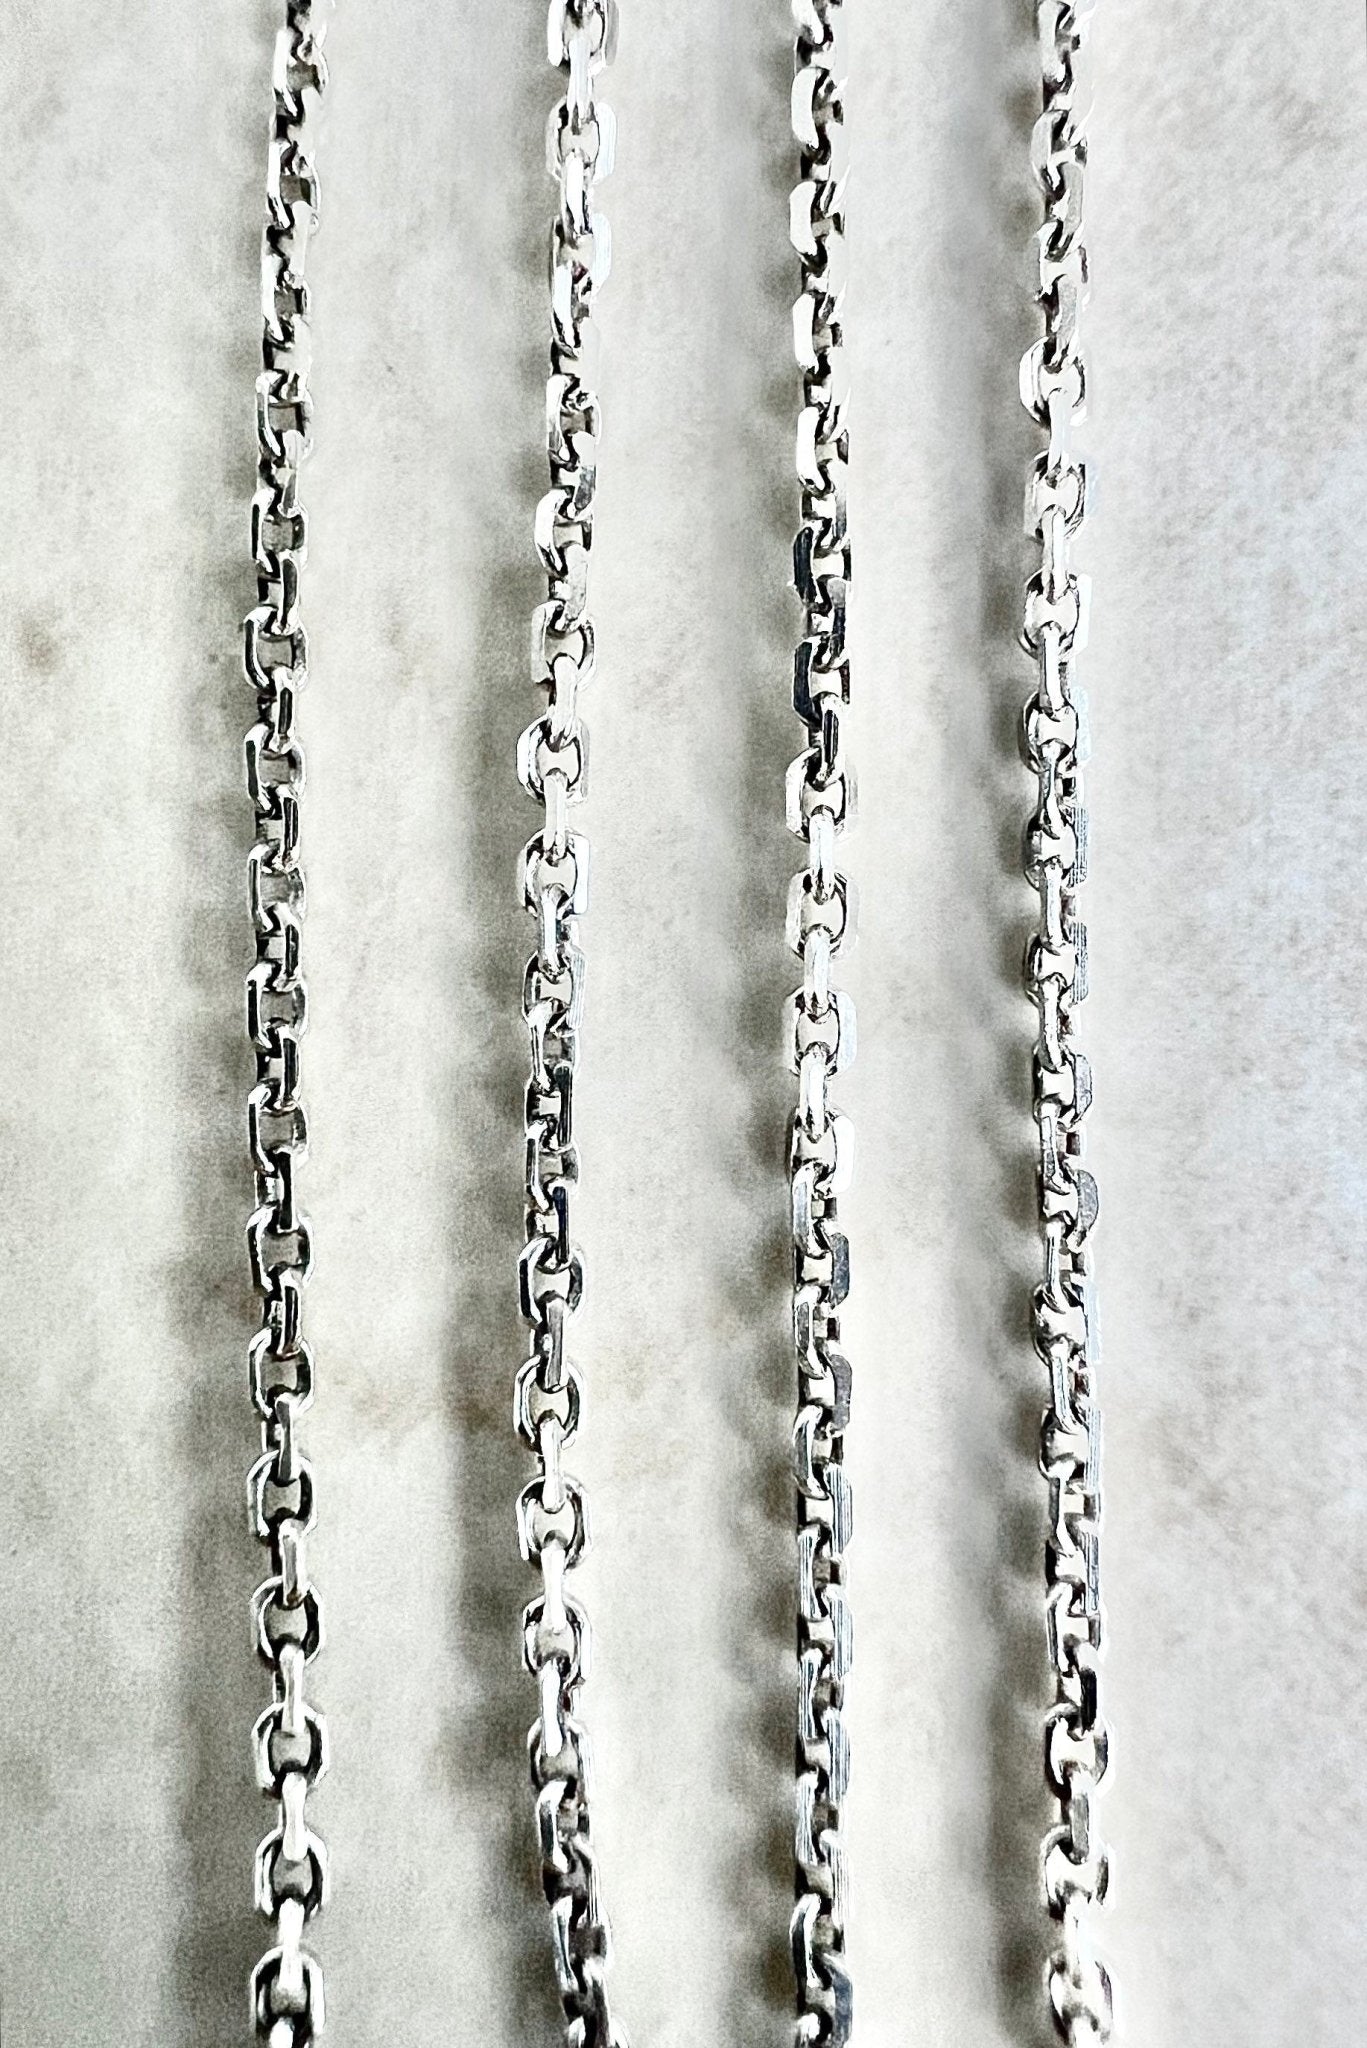 14K White Gold Cable Chain- 16 Inch Gold Chain - Diamond Cut Gold Chain - Diamond Cut Cable Chain - White Gold Chain - Link Chain Necklace